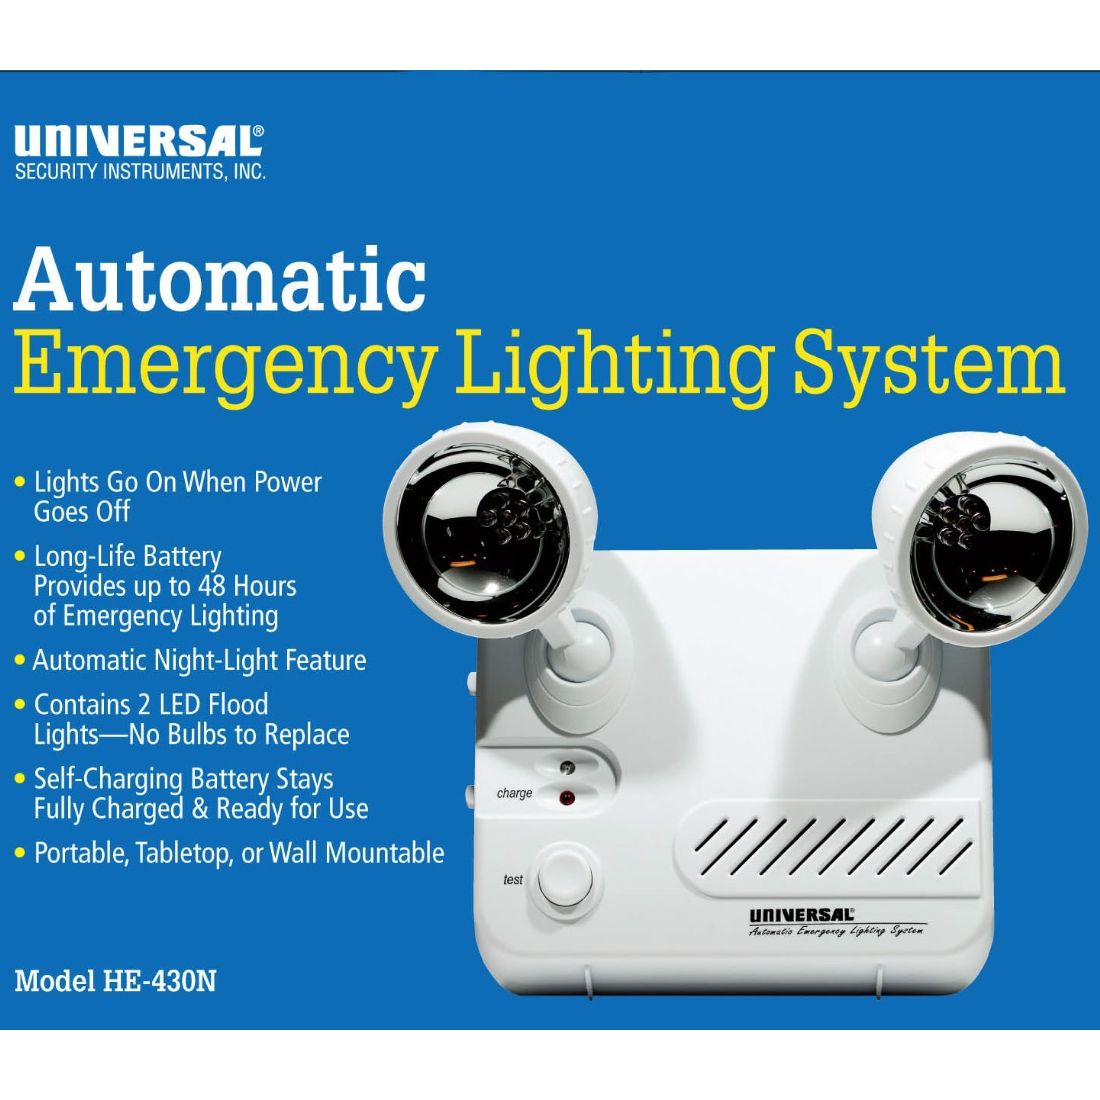 Universal Security Instruments HE-430N Automatic Emergency Lighting System